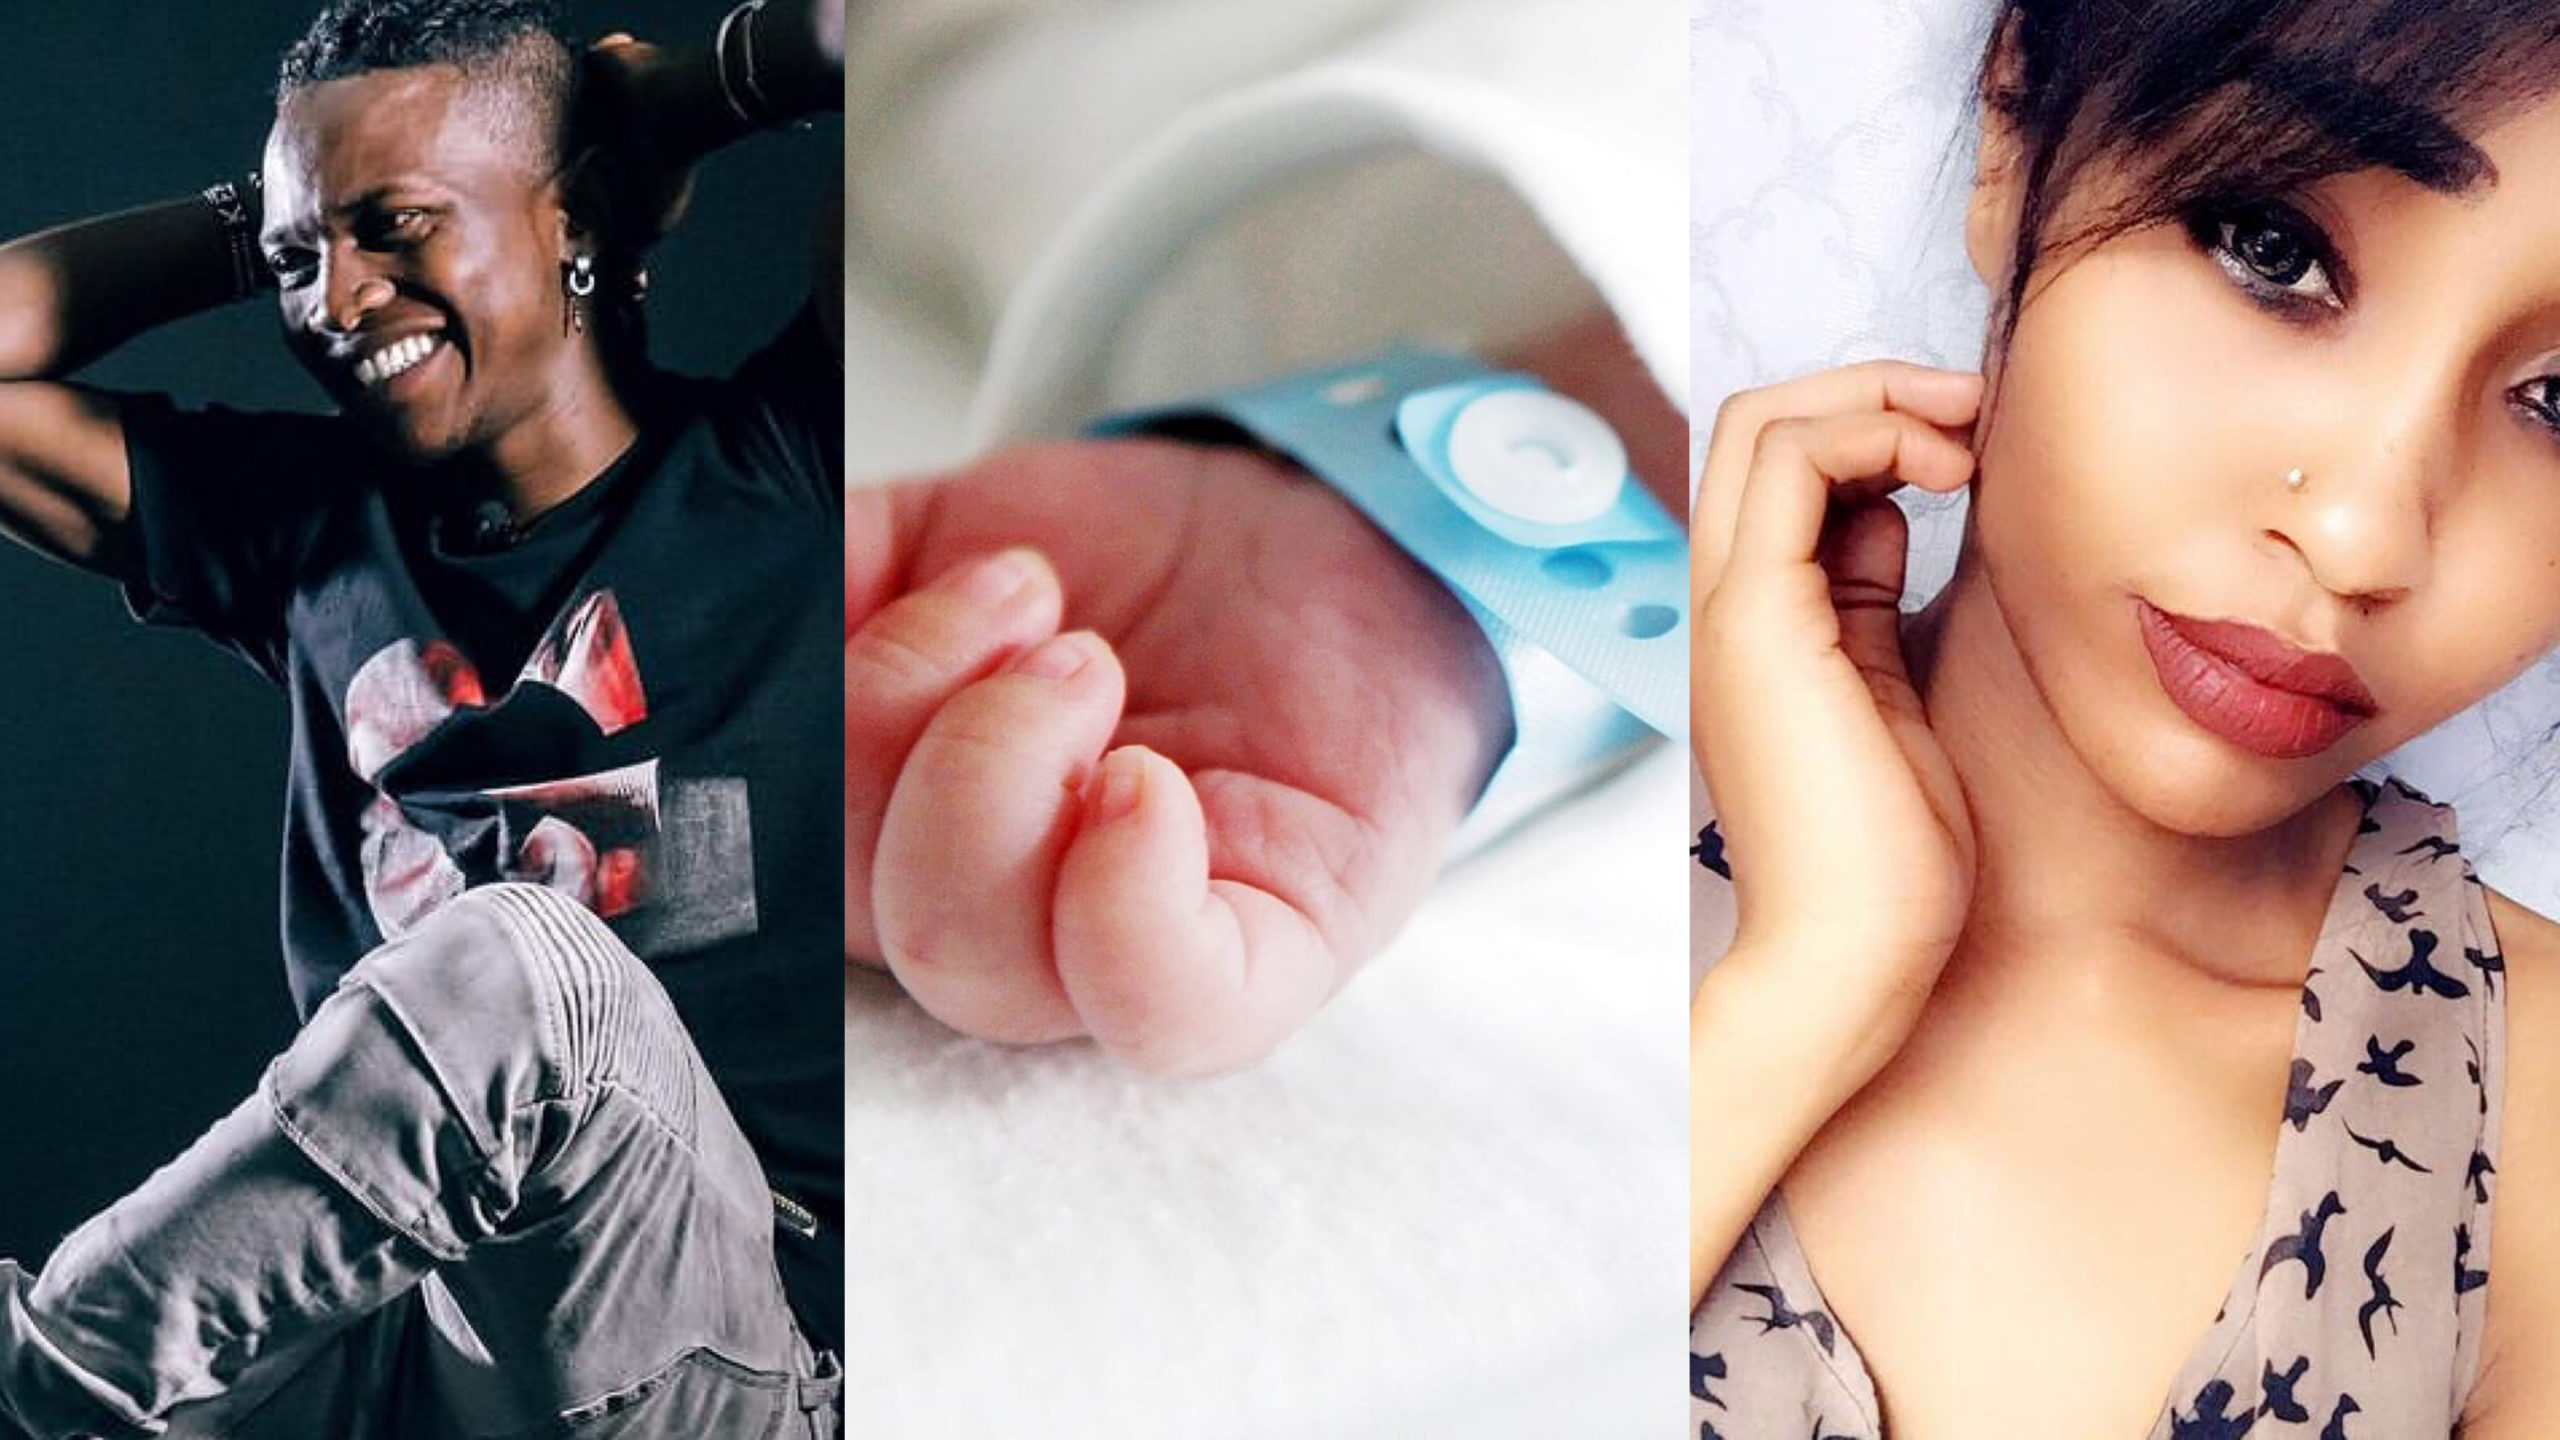 Mr Seed and ‘side chick’ welcome bouncing baby boy! (Photos)